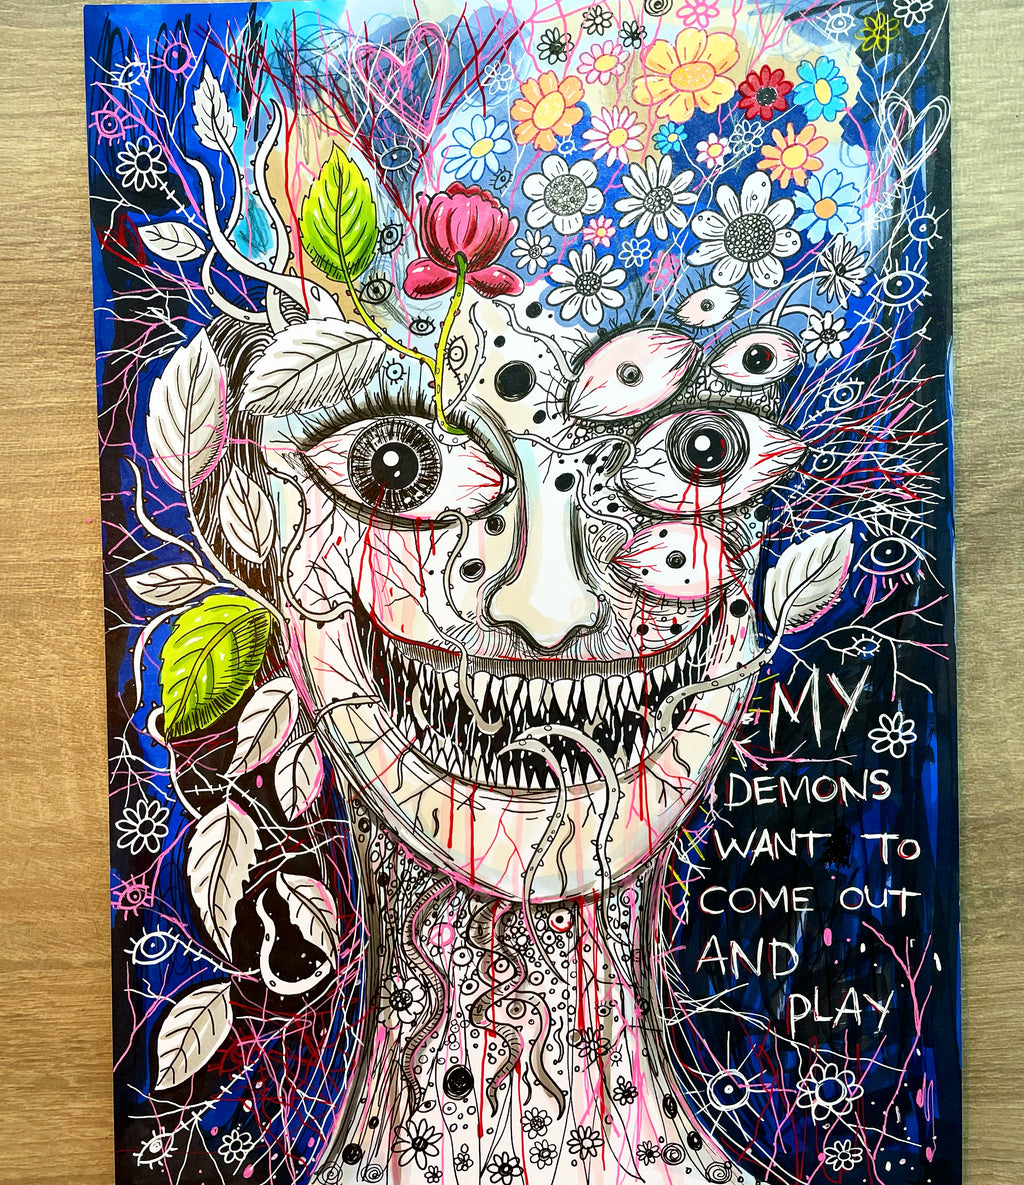 Original ‘My Demons Want To Come Out And Play’ Mixed Media (A4)